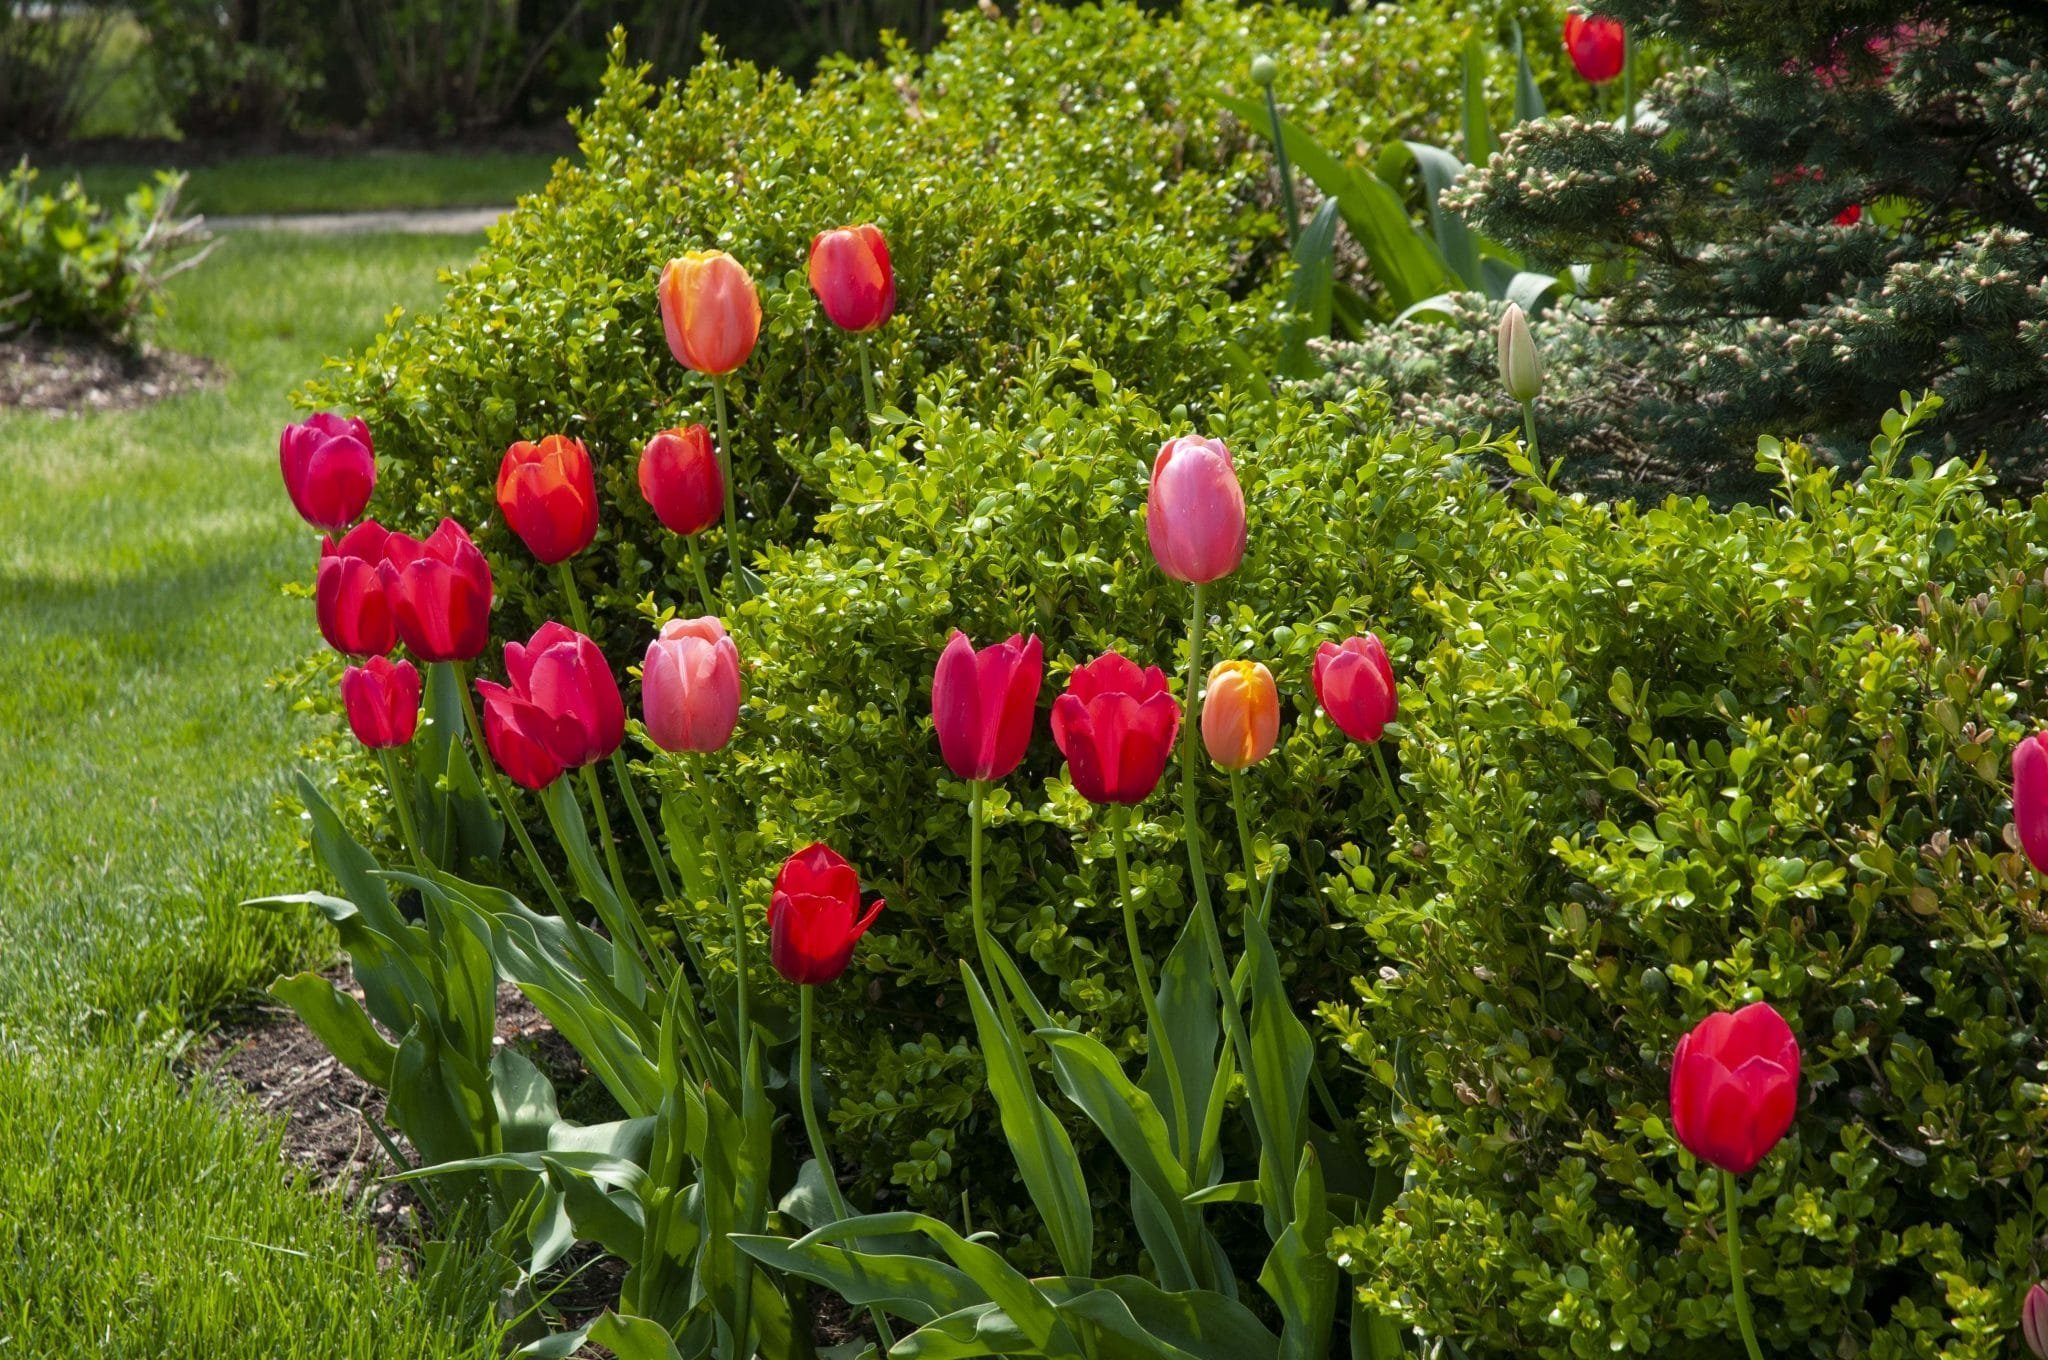 Pockets of tulips squeezed between boxwoods